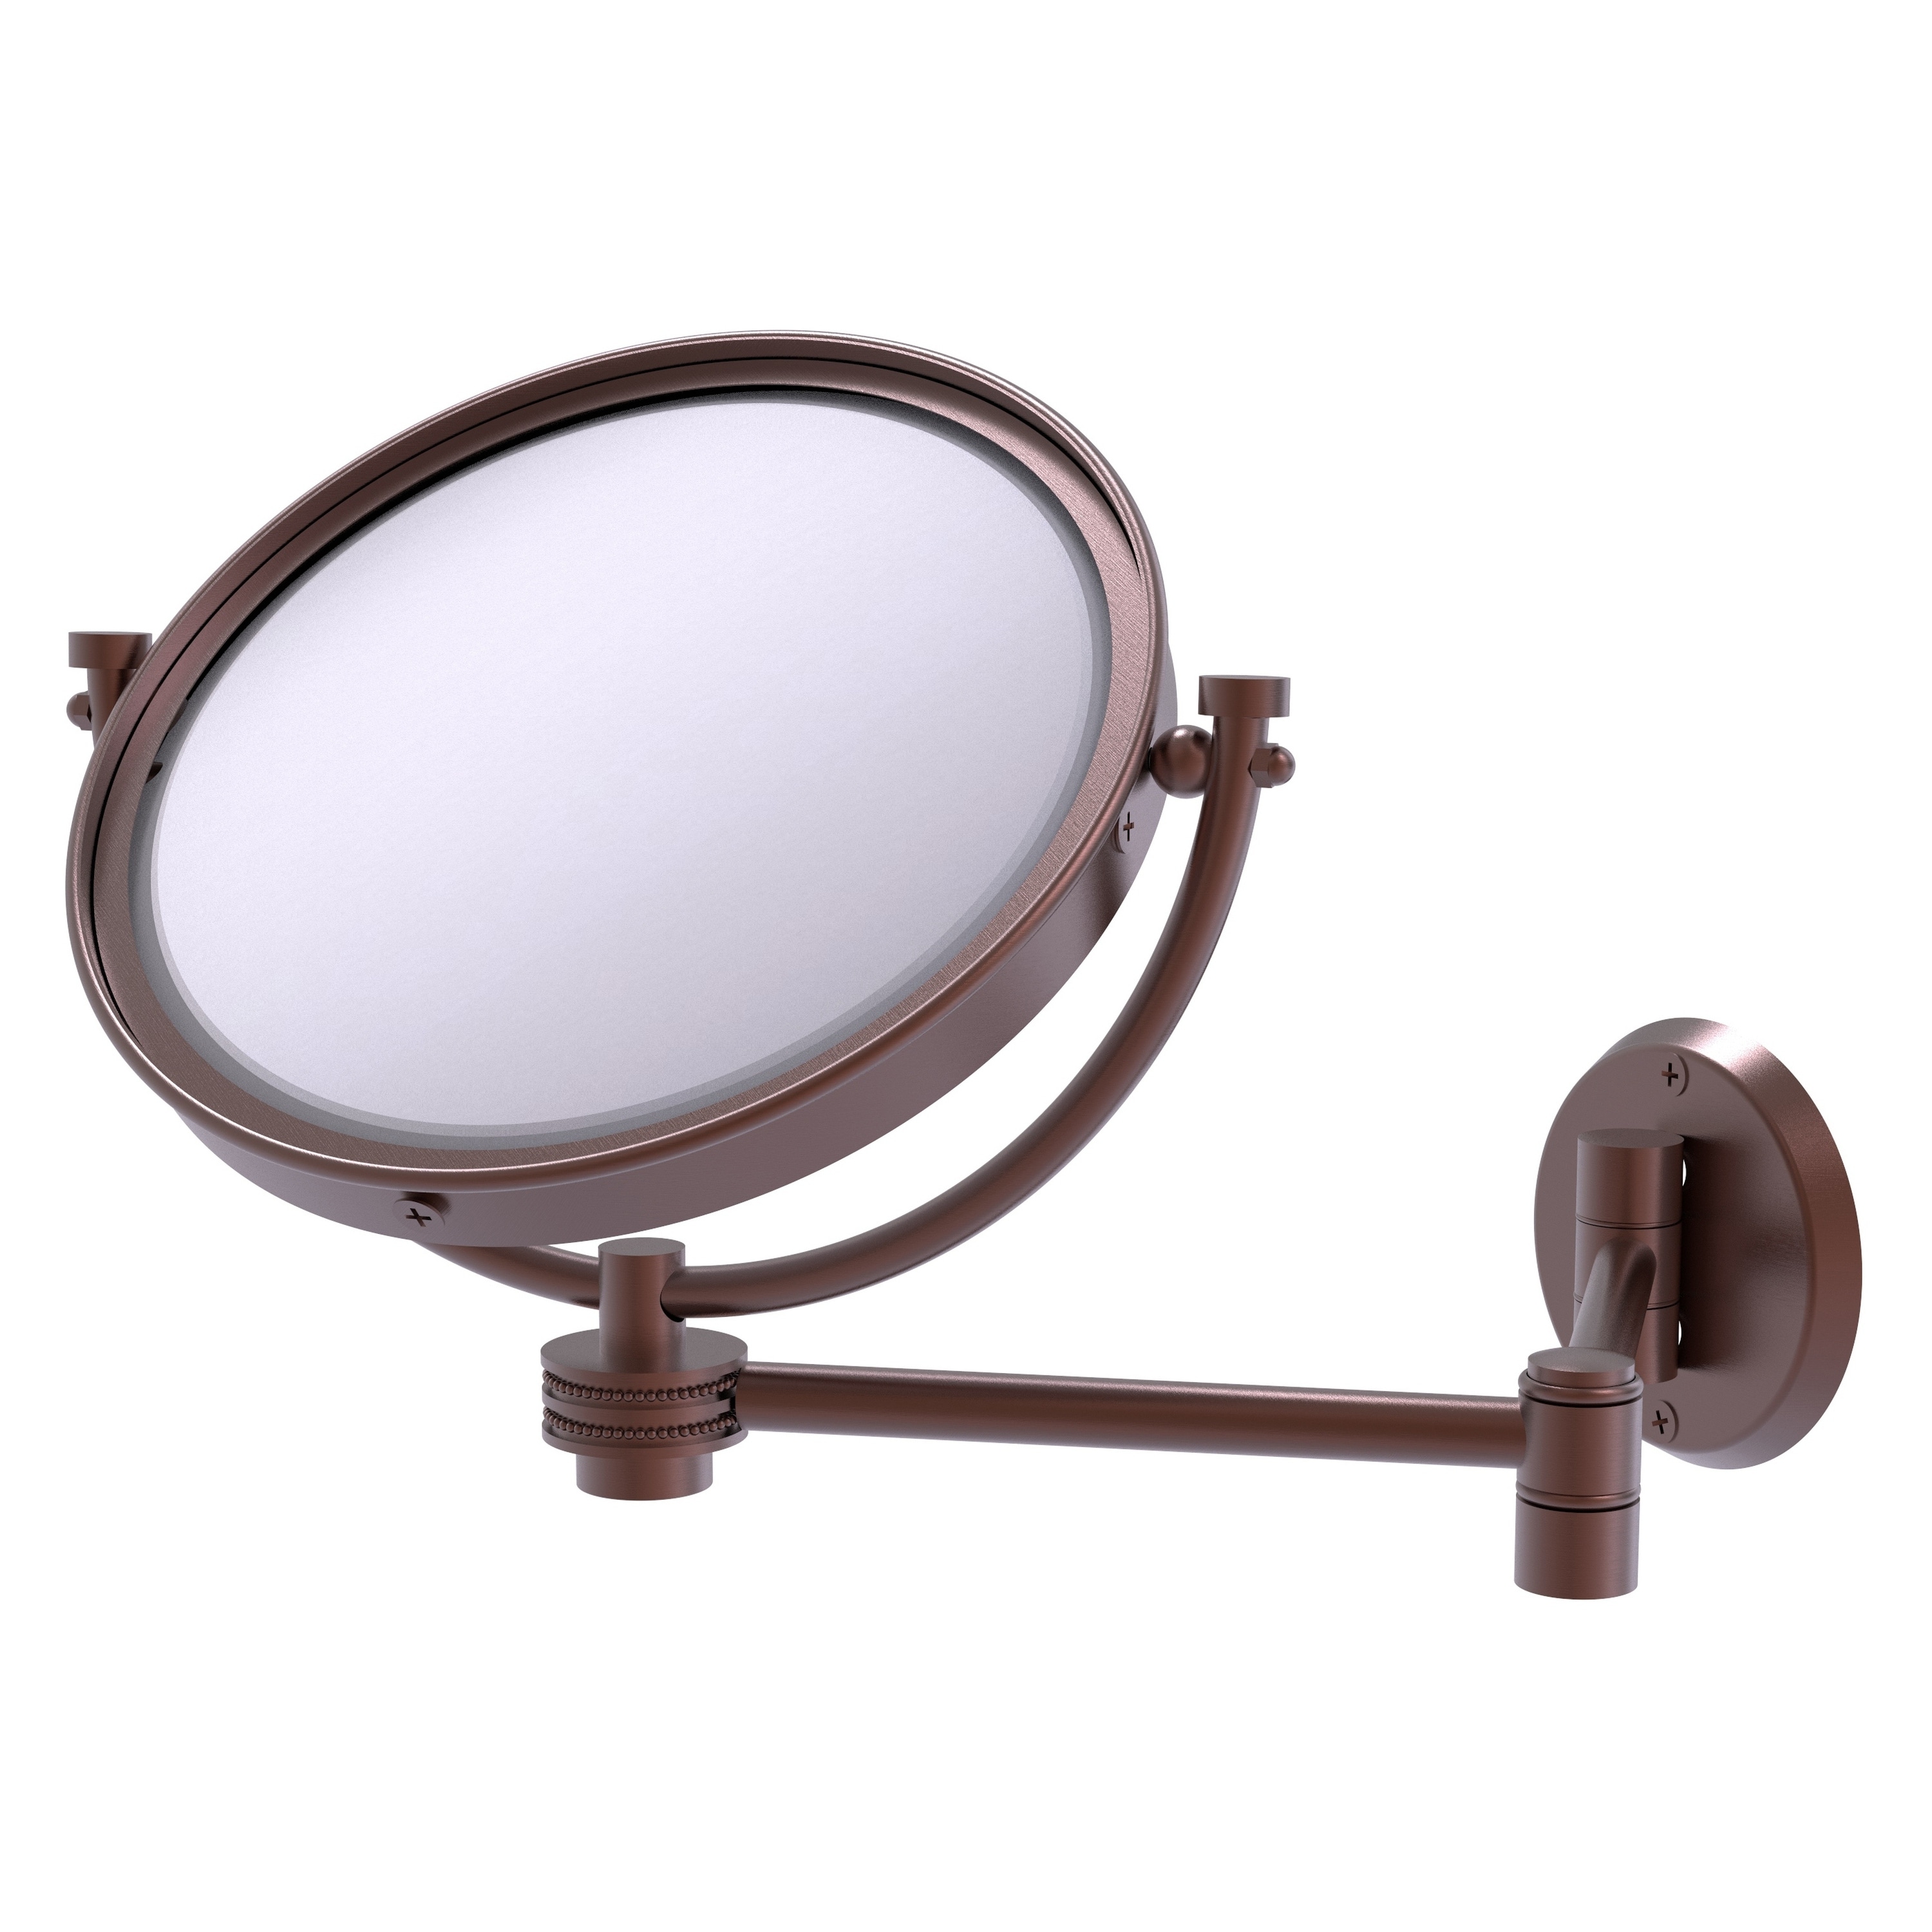 8-in x 10-in Antique Copper Double-sided 3X Magnifying Wall-mounted Vanity Mirror | - Allied Brass WM-6D/3X-CA